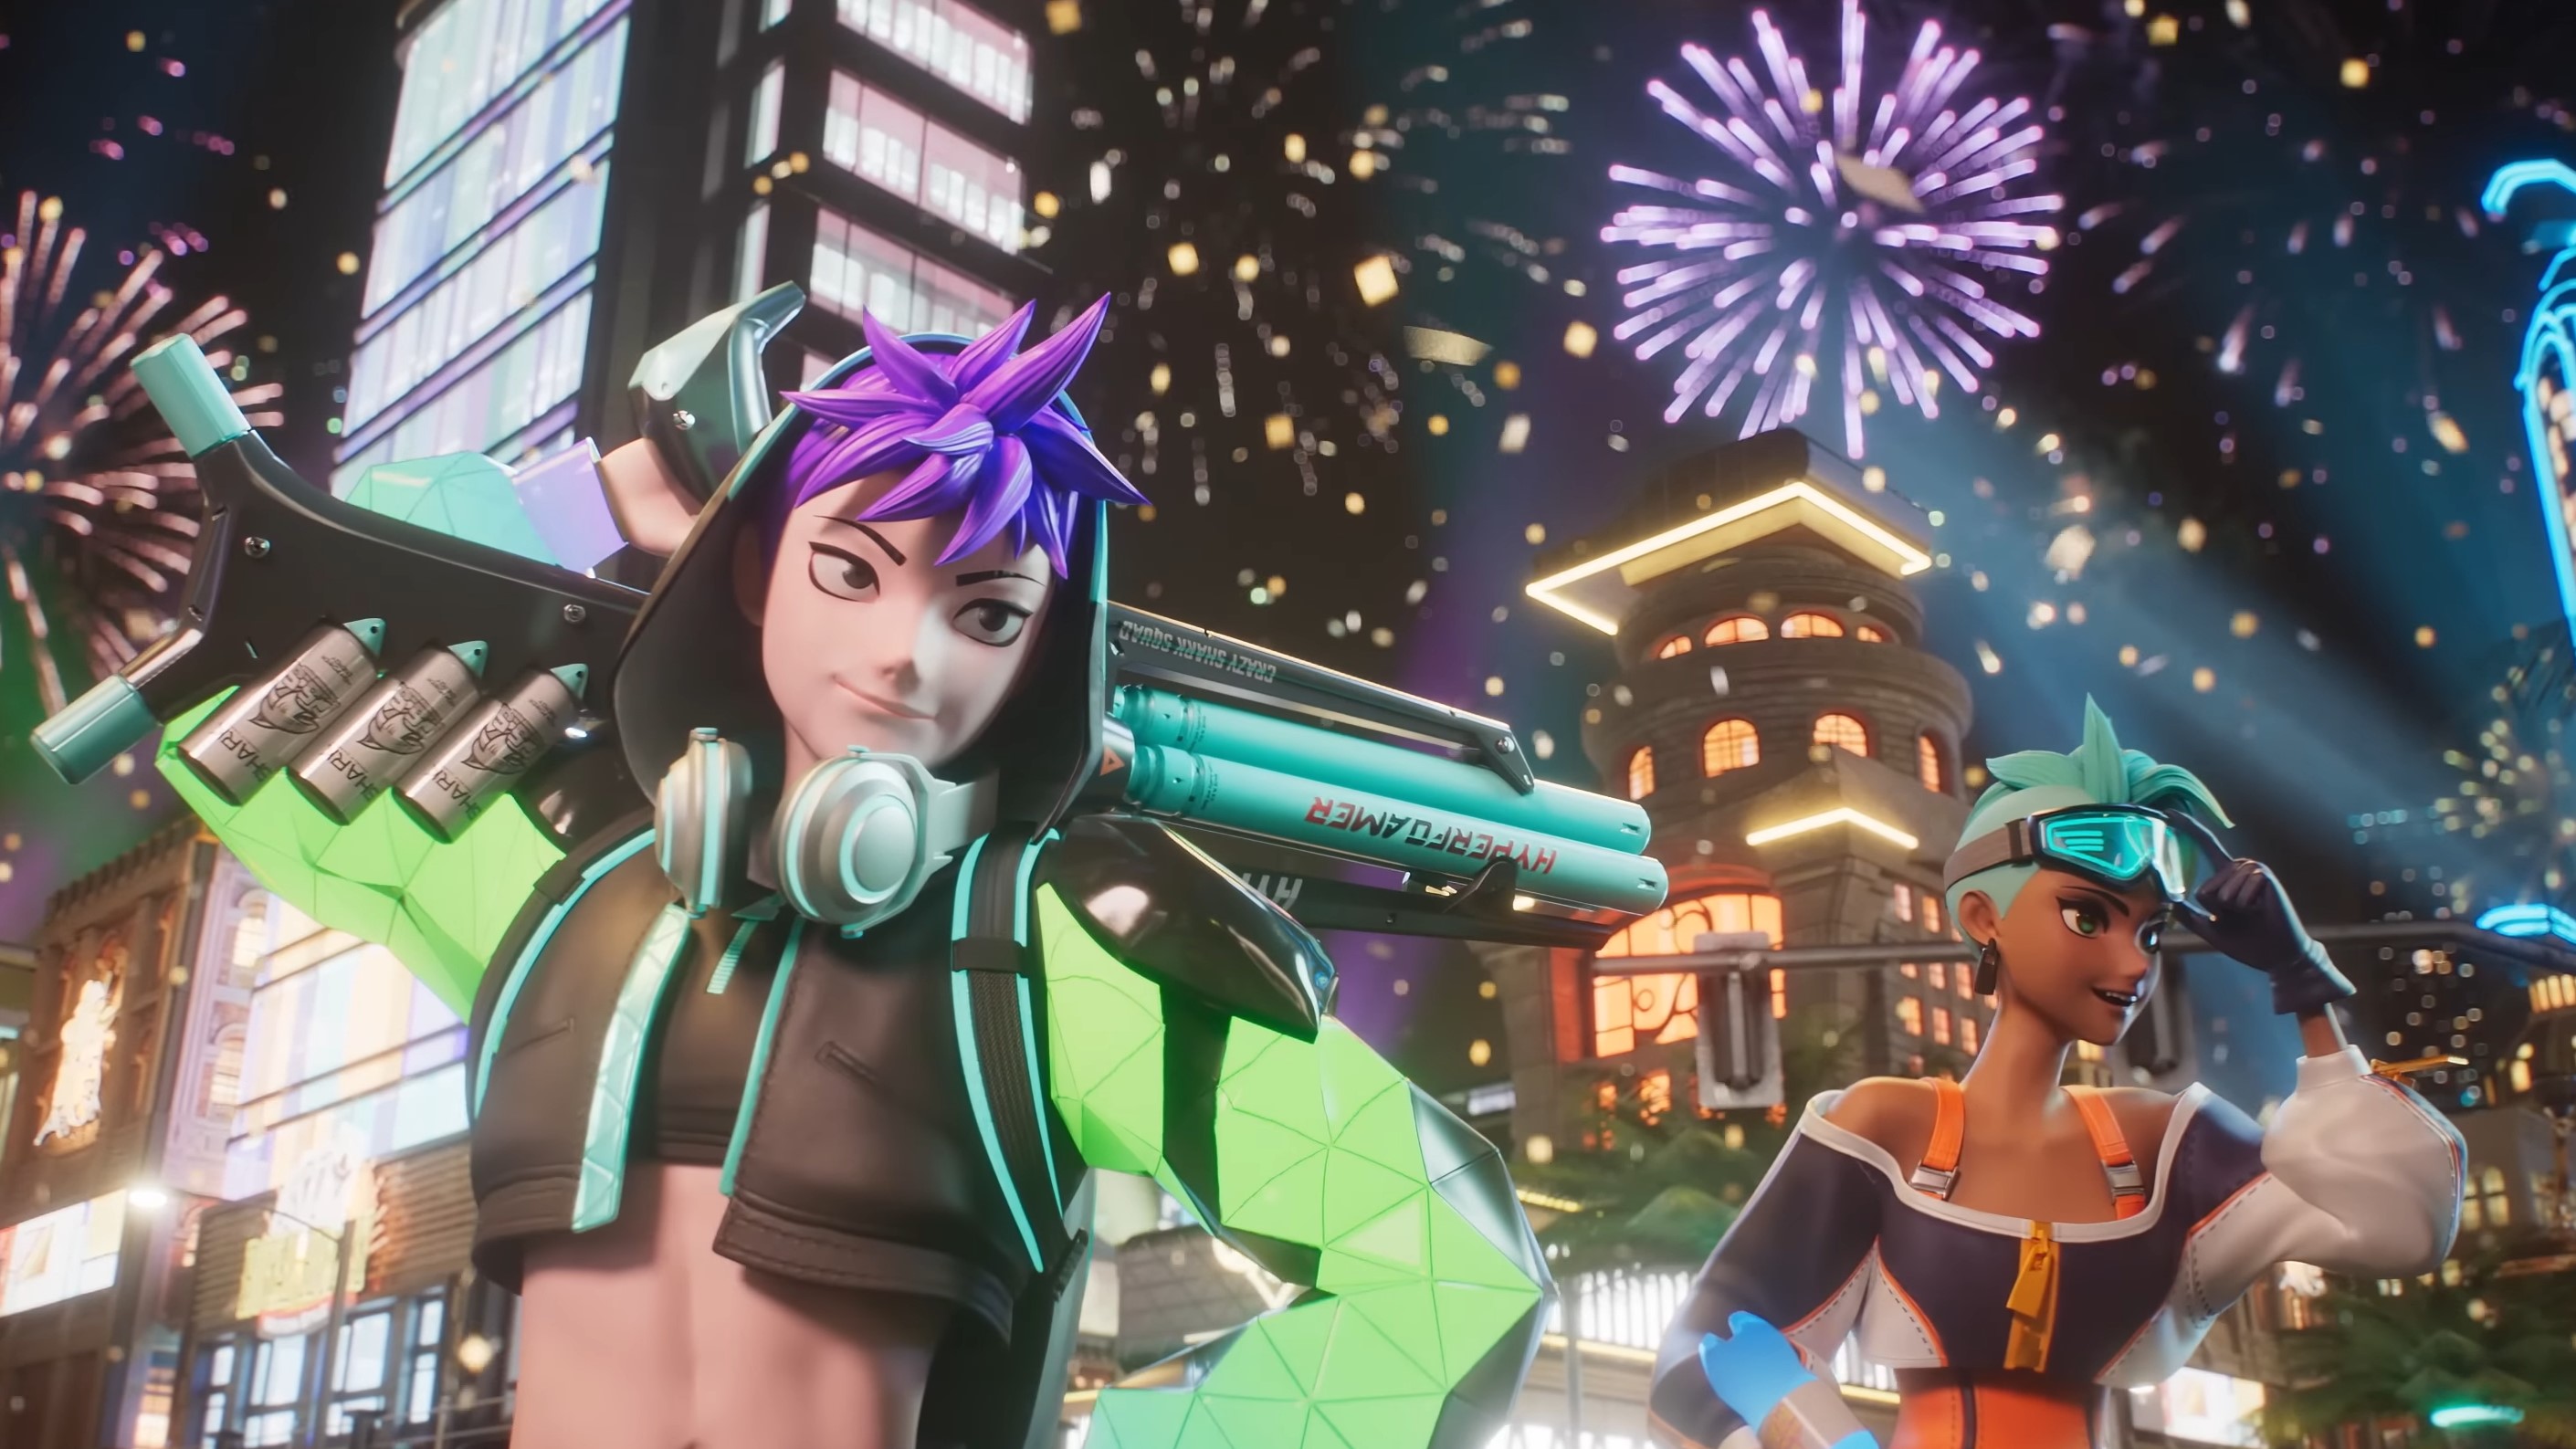 Characters wielding strange weapons in the streets of a bright city in the Foamstars trailer.